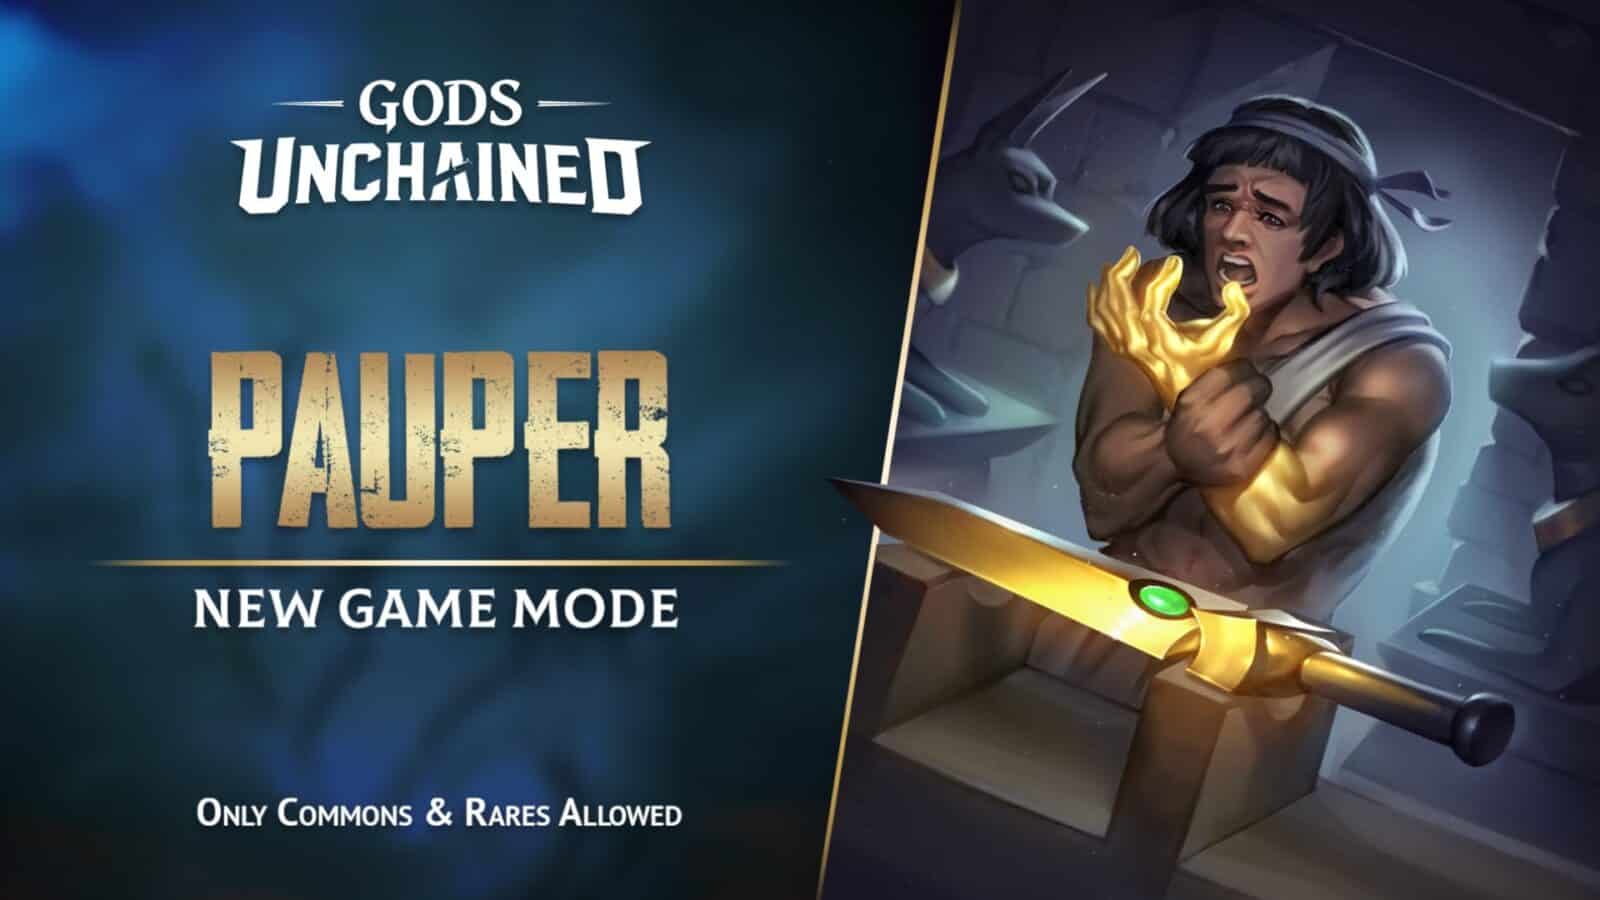 Gods Unchained Introduces Pauper Game Mode Together With New Tournament Gods Unchained has rolled out its latest game mode, "Pauper." Designed as part of its new rotation system, this mode will be accessible to all registered platform players, subject to certain eligibility criteria.